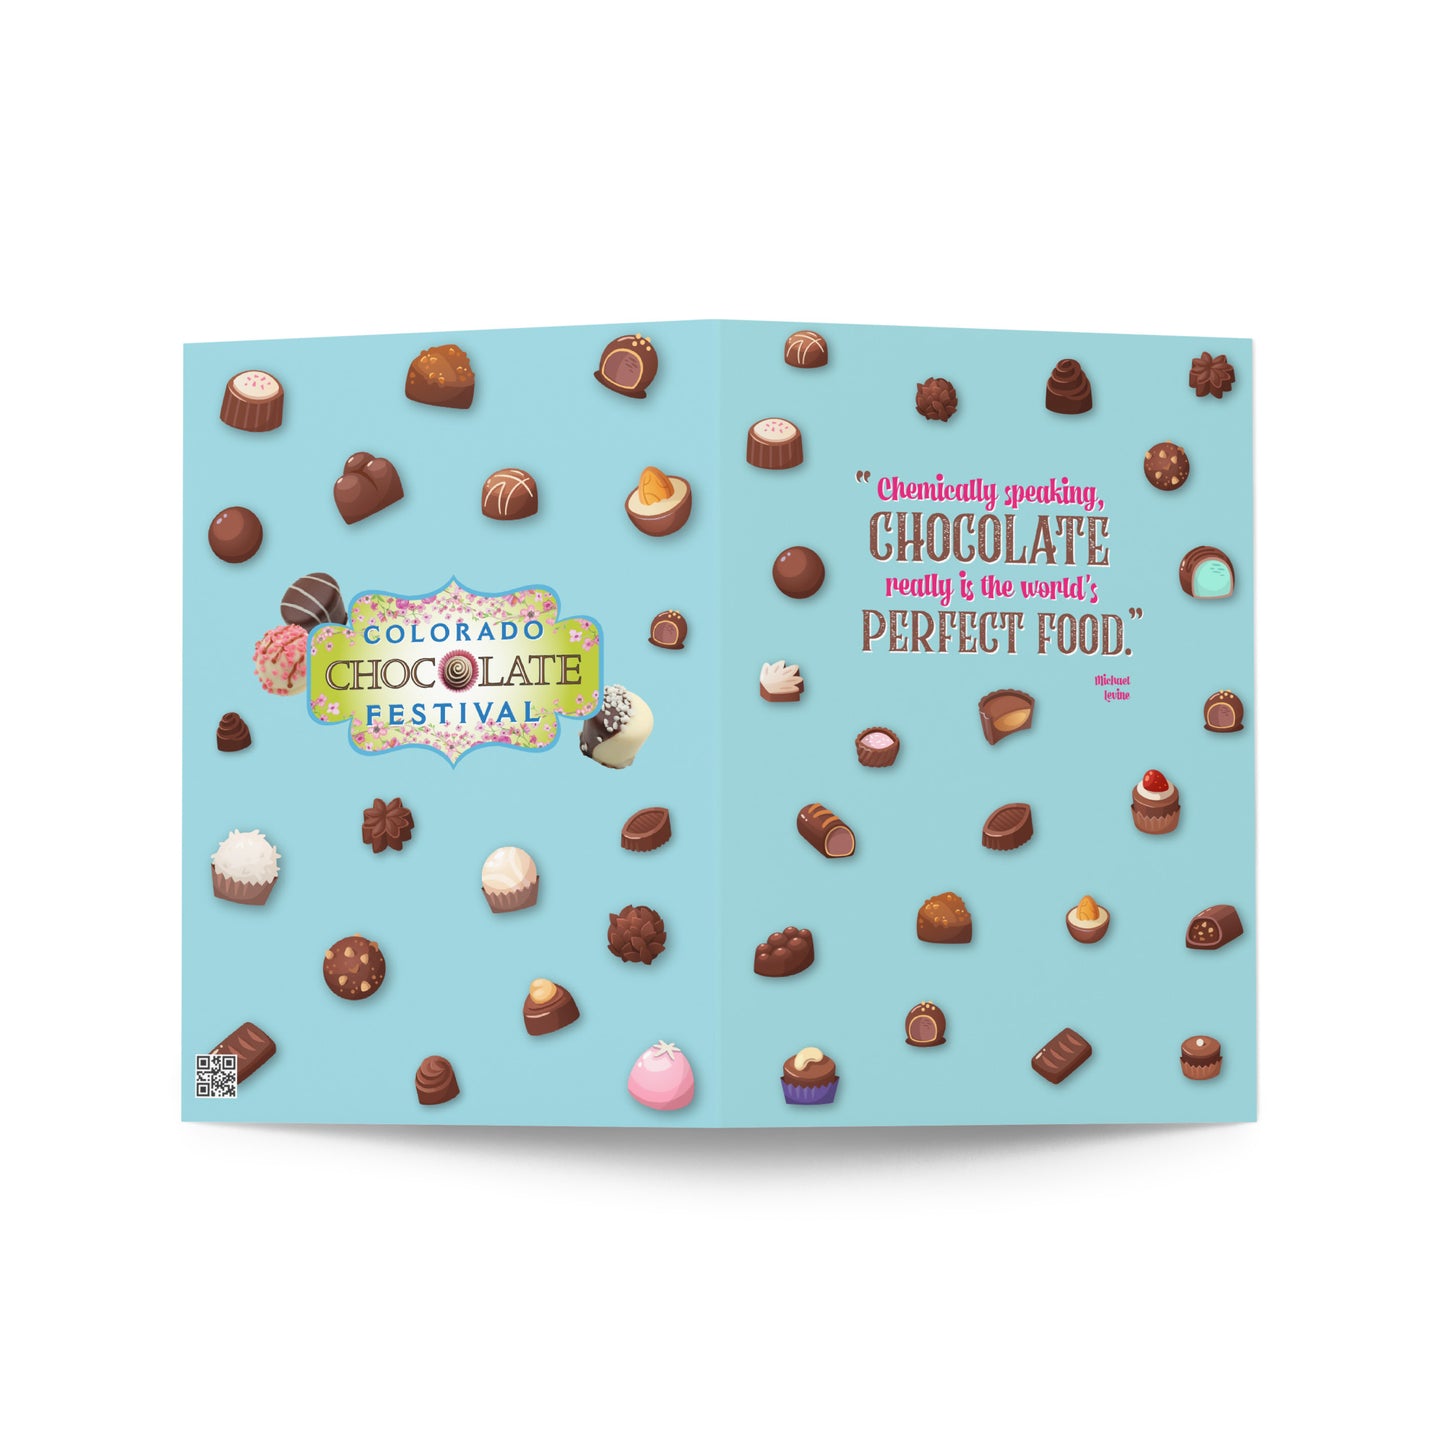 Chocolate is the Perfect Food Greeting card